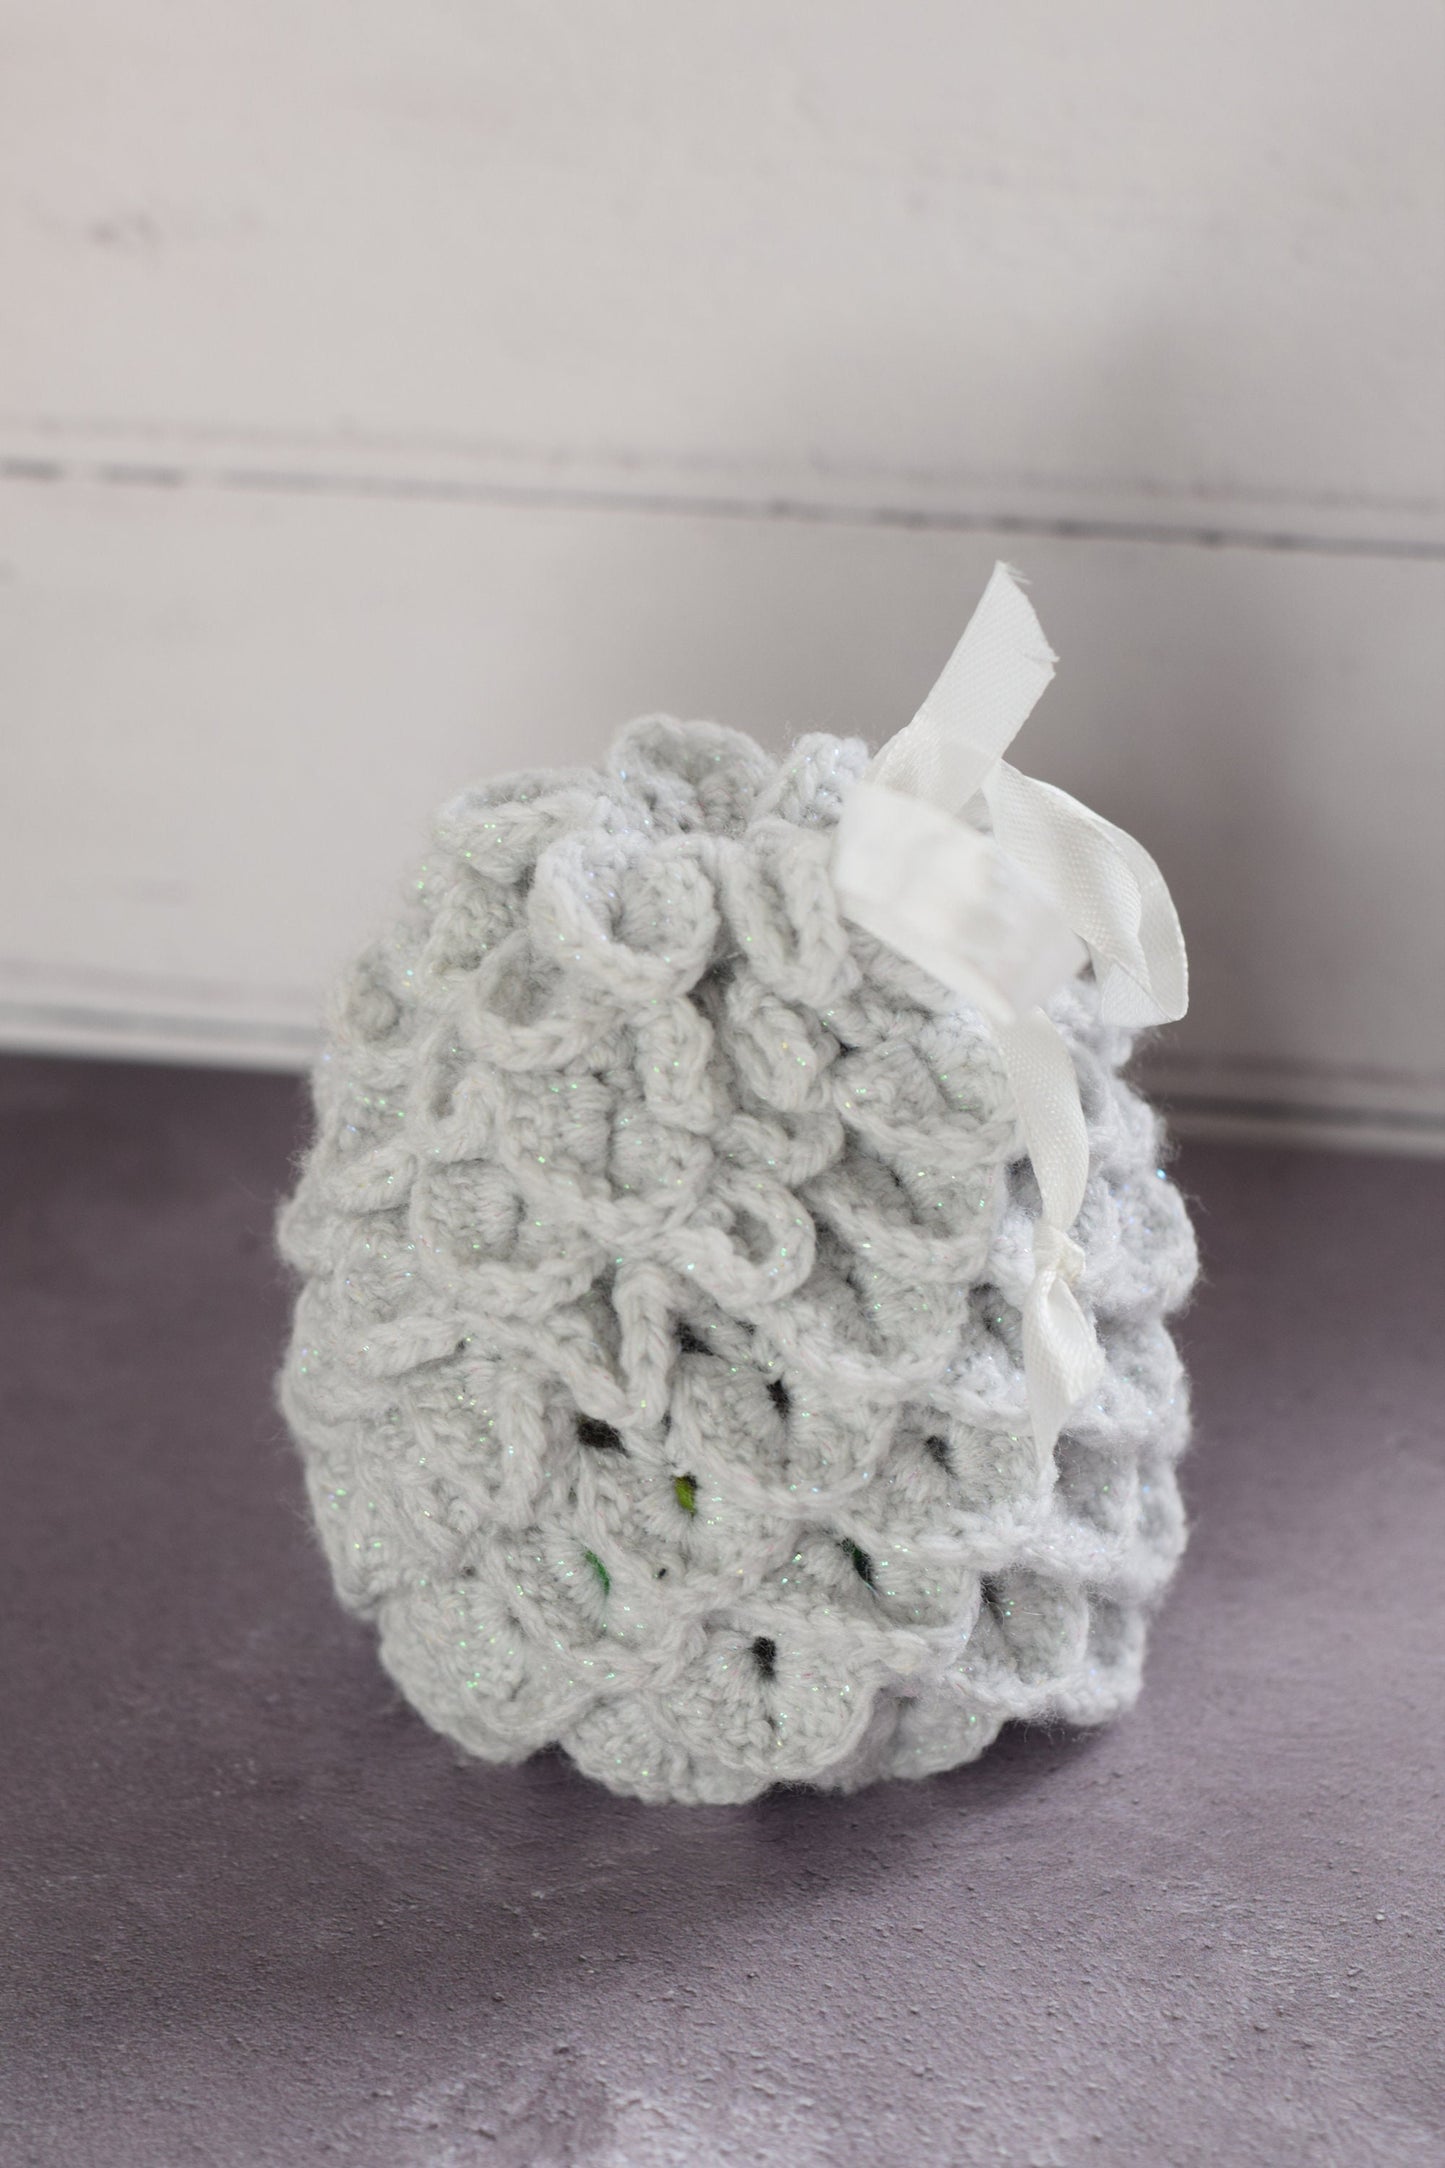 Frost Dragon Egg Dice Bag! - Silver and White // Crocheted scale effect bag, handmade, great for dice storage